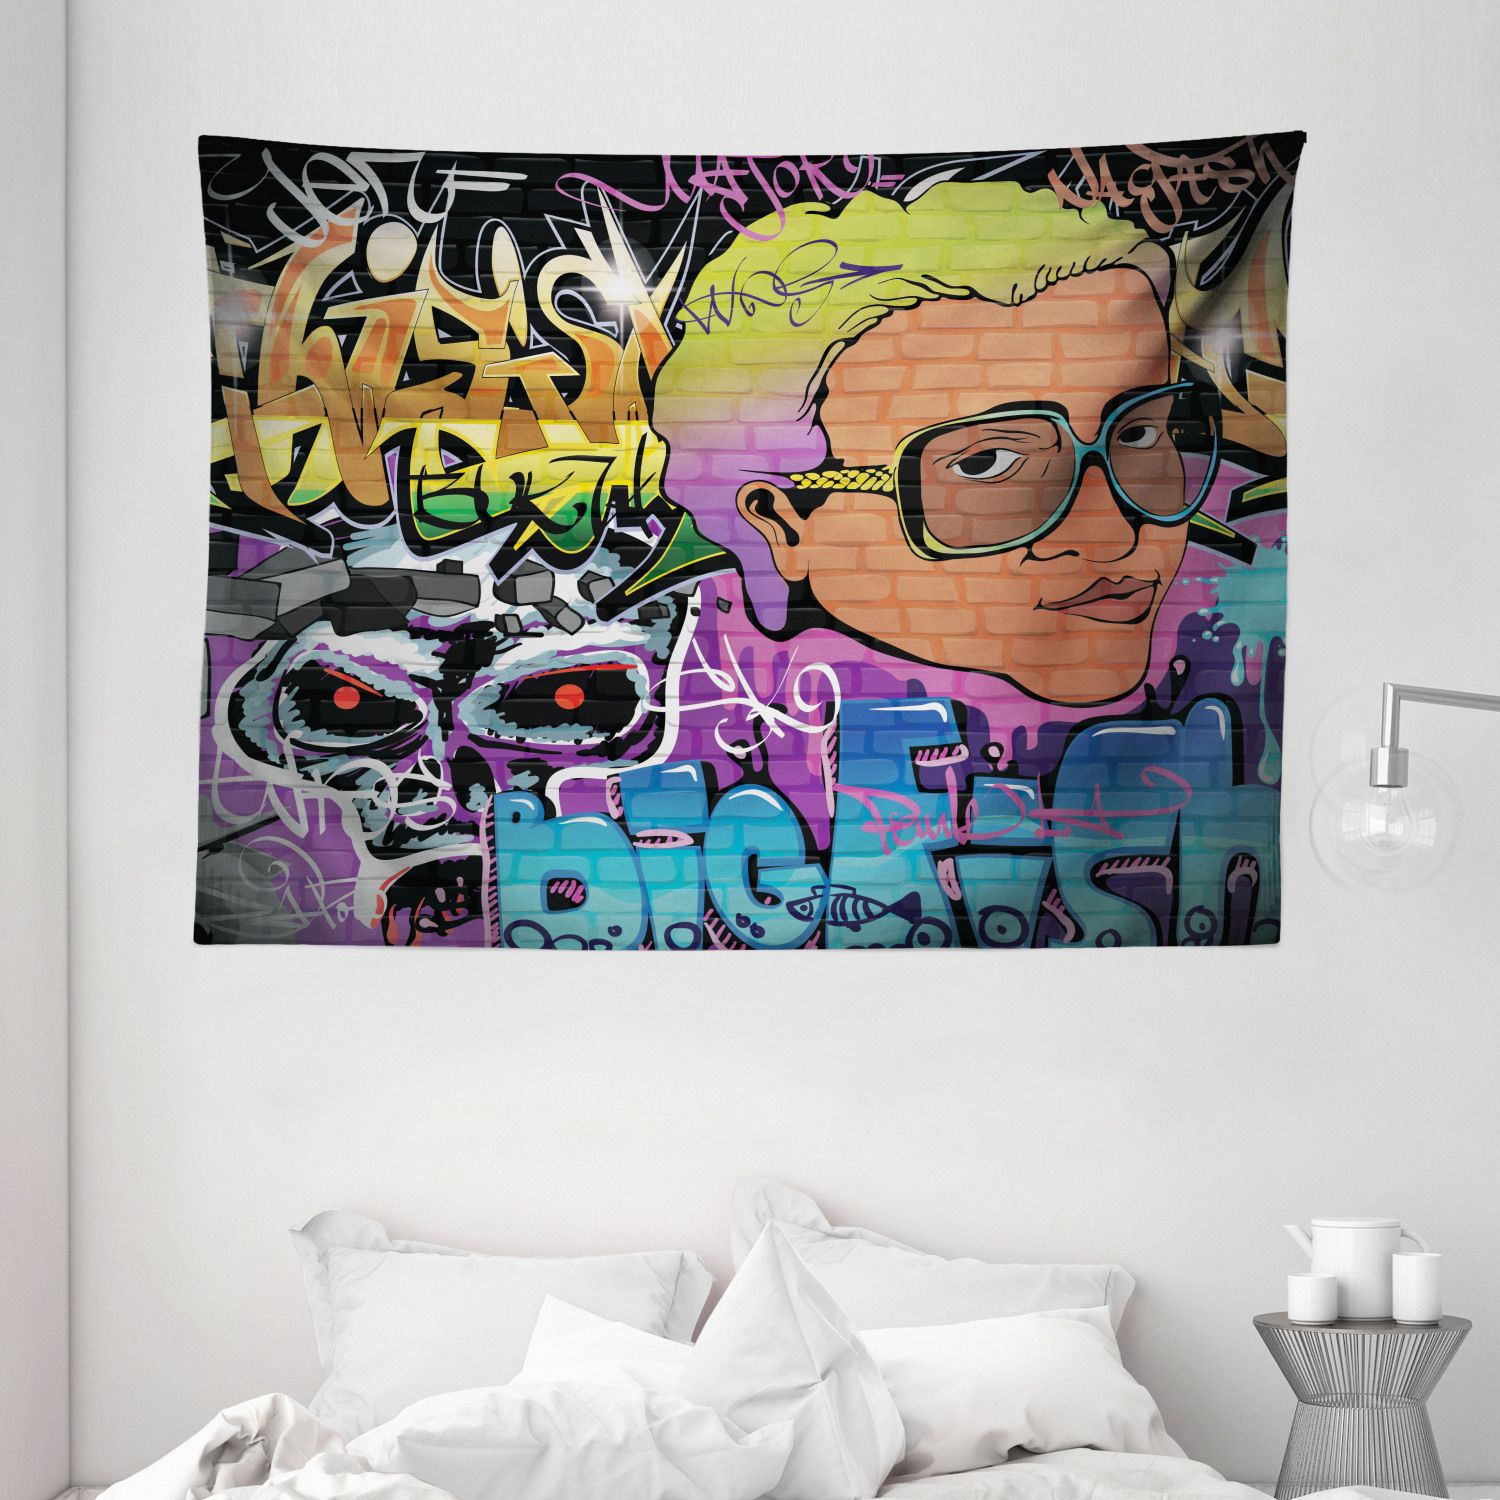 Urban Graffiti Tapestry, Artistic Hip Hop Design Graffiti Wall Urban Art  Background Man Head Detail, Wall Hanging For Bedroom Living Room Dorm Decor,  80w X 60l Inches, Multicolor,ambesonne – Walmart Pertaining To Hip Hop Design Wall Art (View 11 of 15)